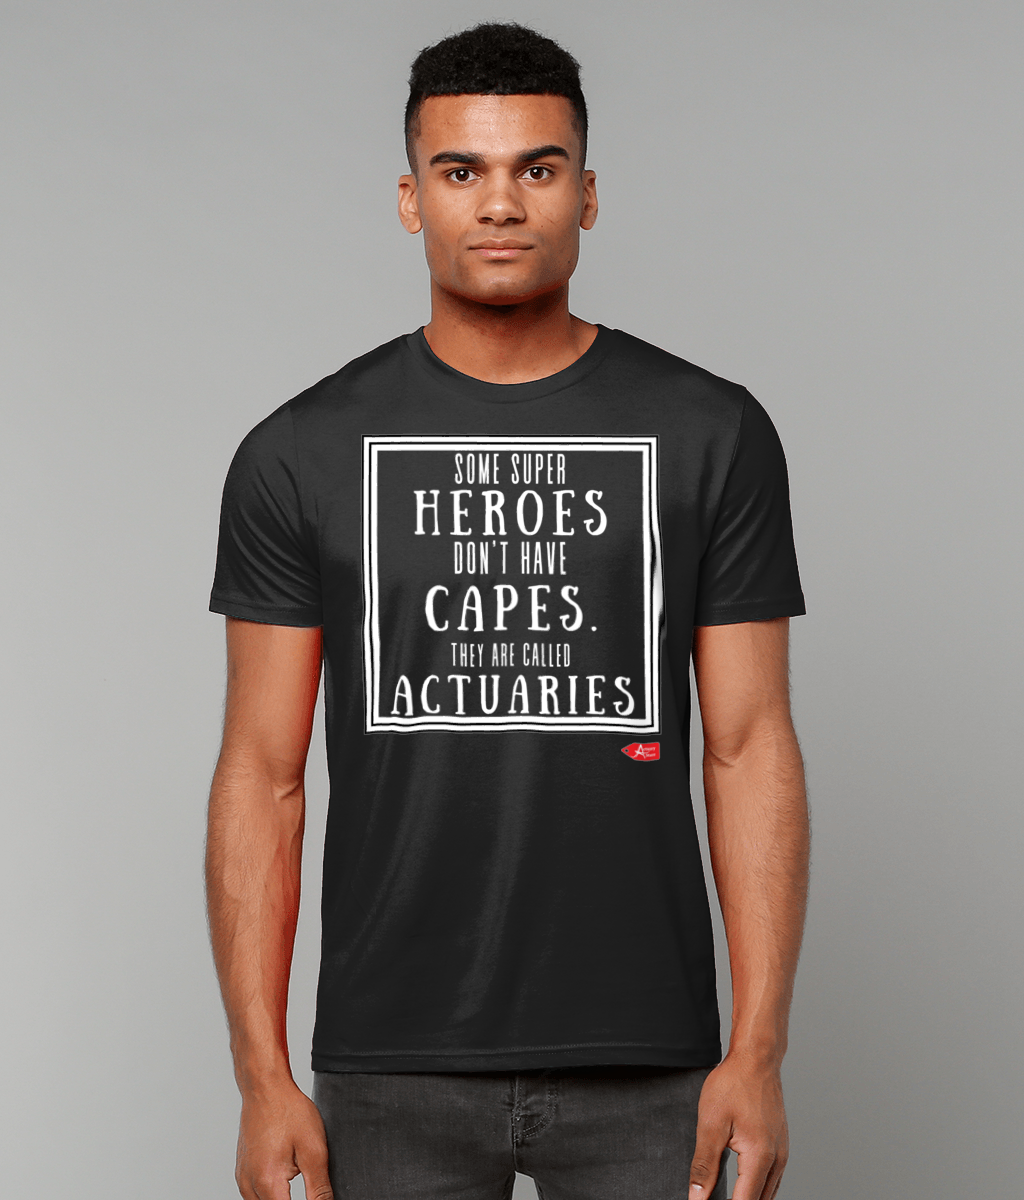 Some Super Heroes Don't Have Capes They're Called Actuaries T-Shirt